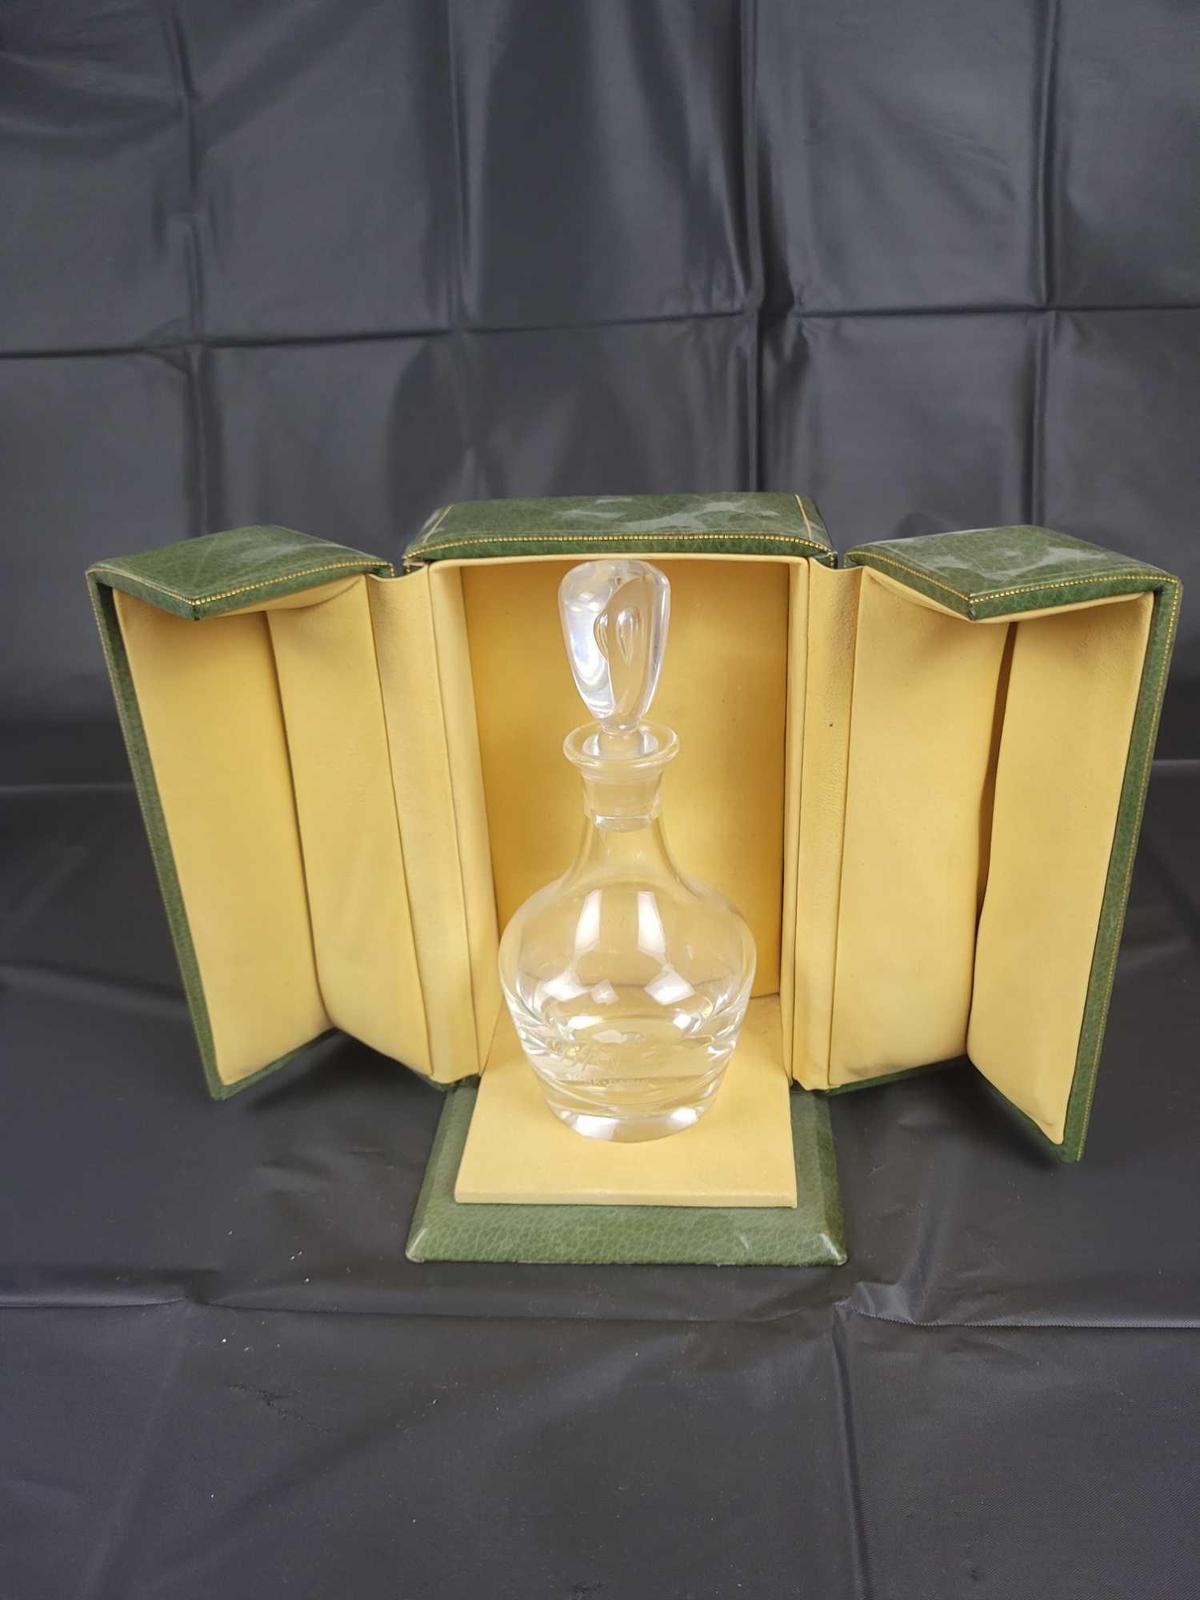 Signed Stueben perfume bottle with case, believed to be Joan Crawford